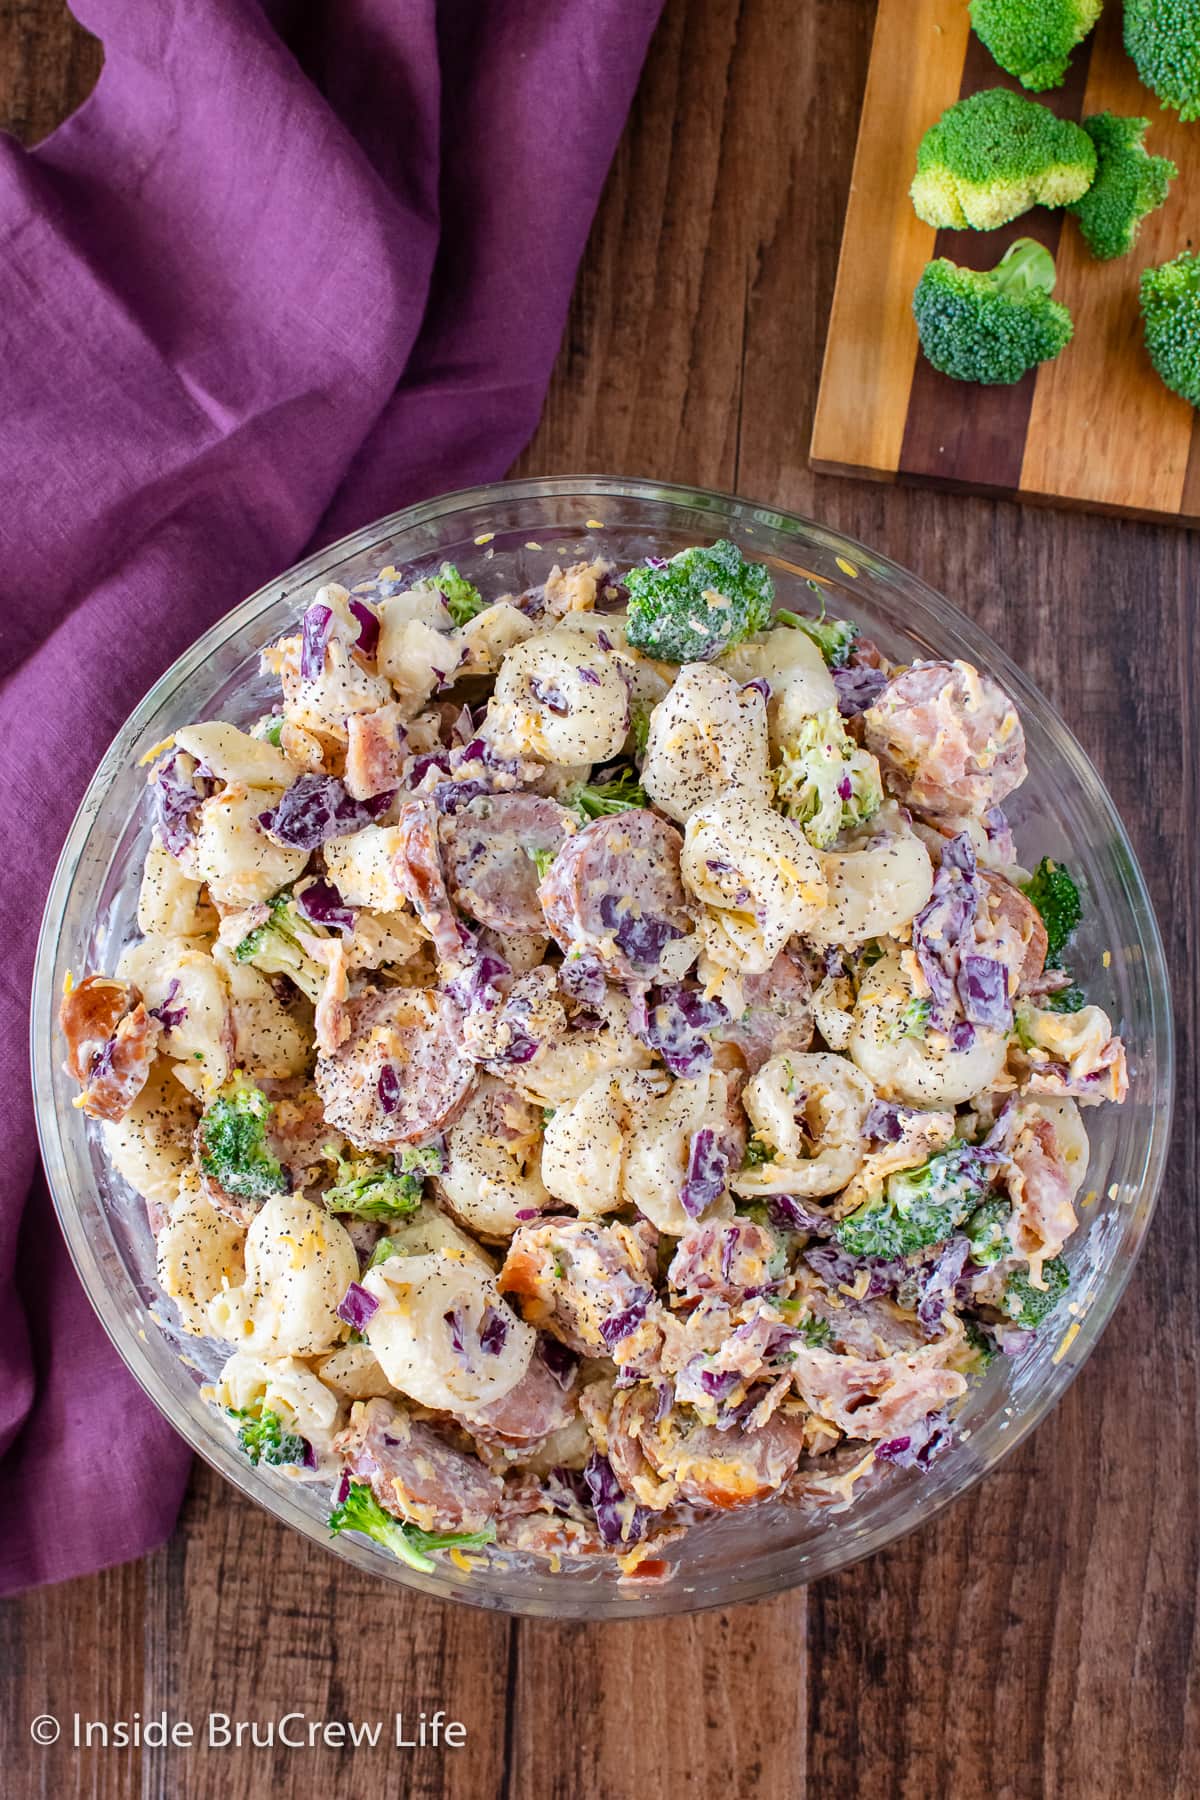 A large bowl filled with a creamy tortellini salad with broccoli.